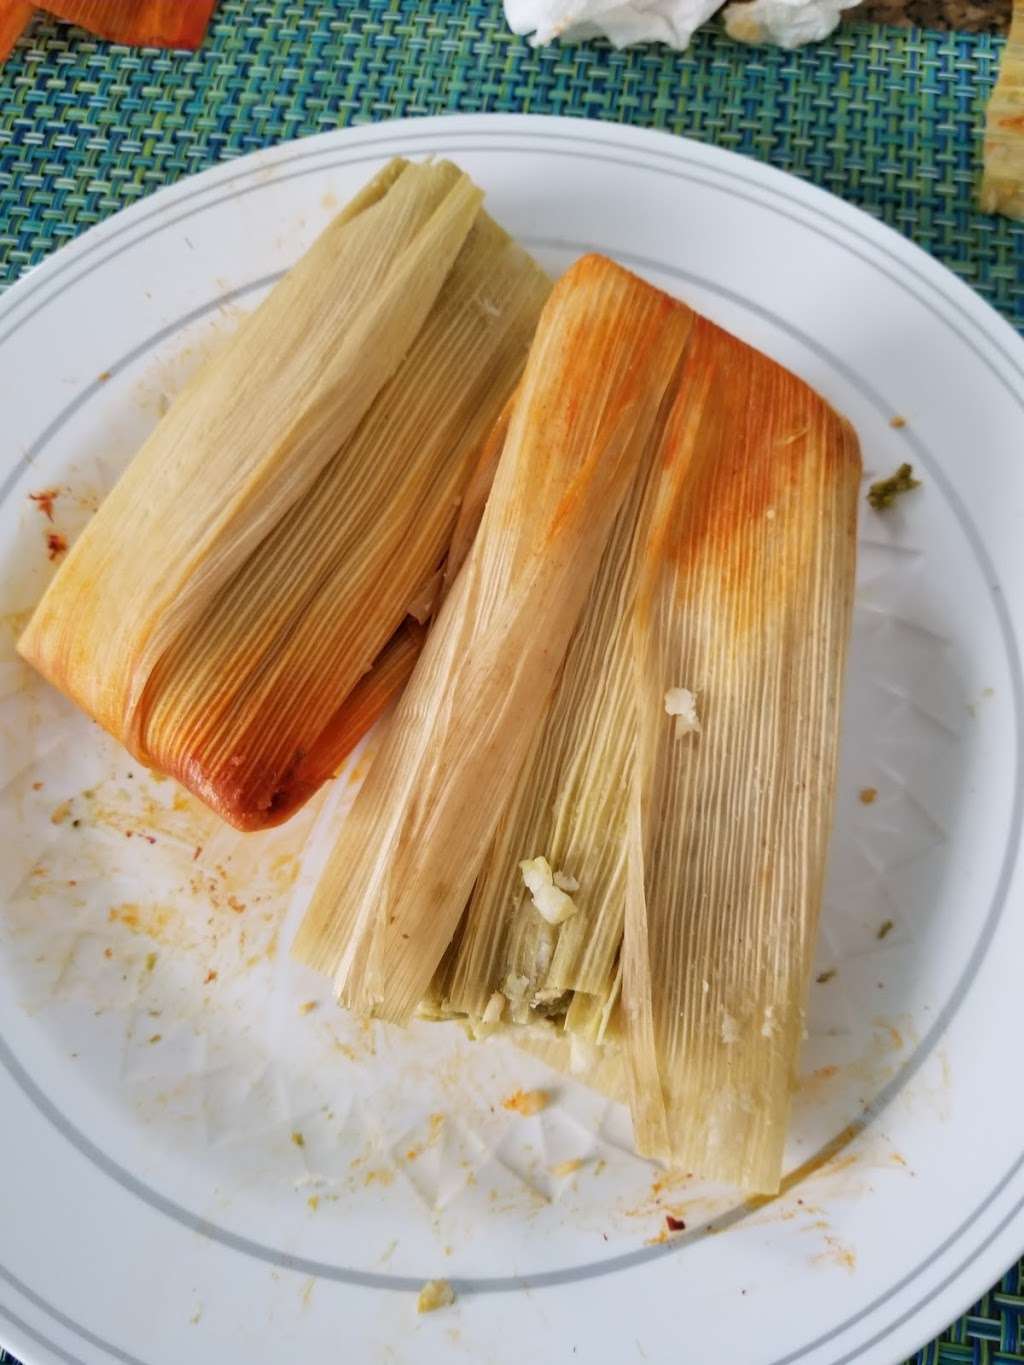 Lolitas Mexican Food & Tamales | 6340 Ogden Ave, Berwyn, IL 60402 | Phone: (708) 795-6859